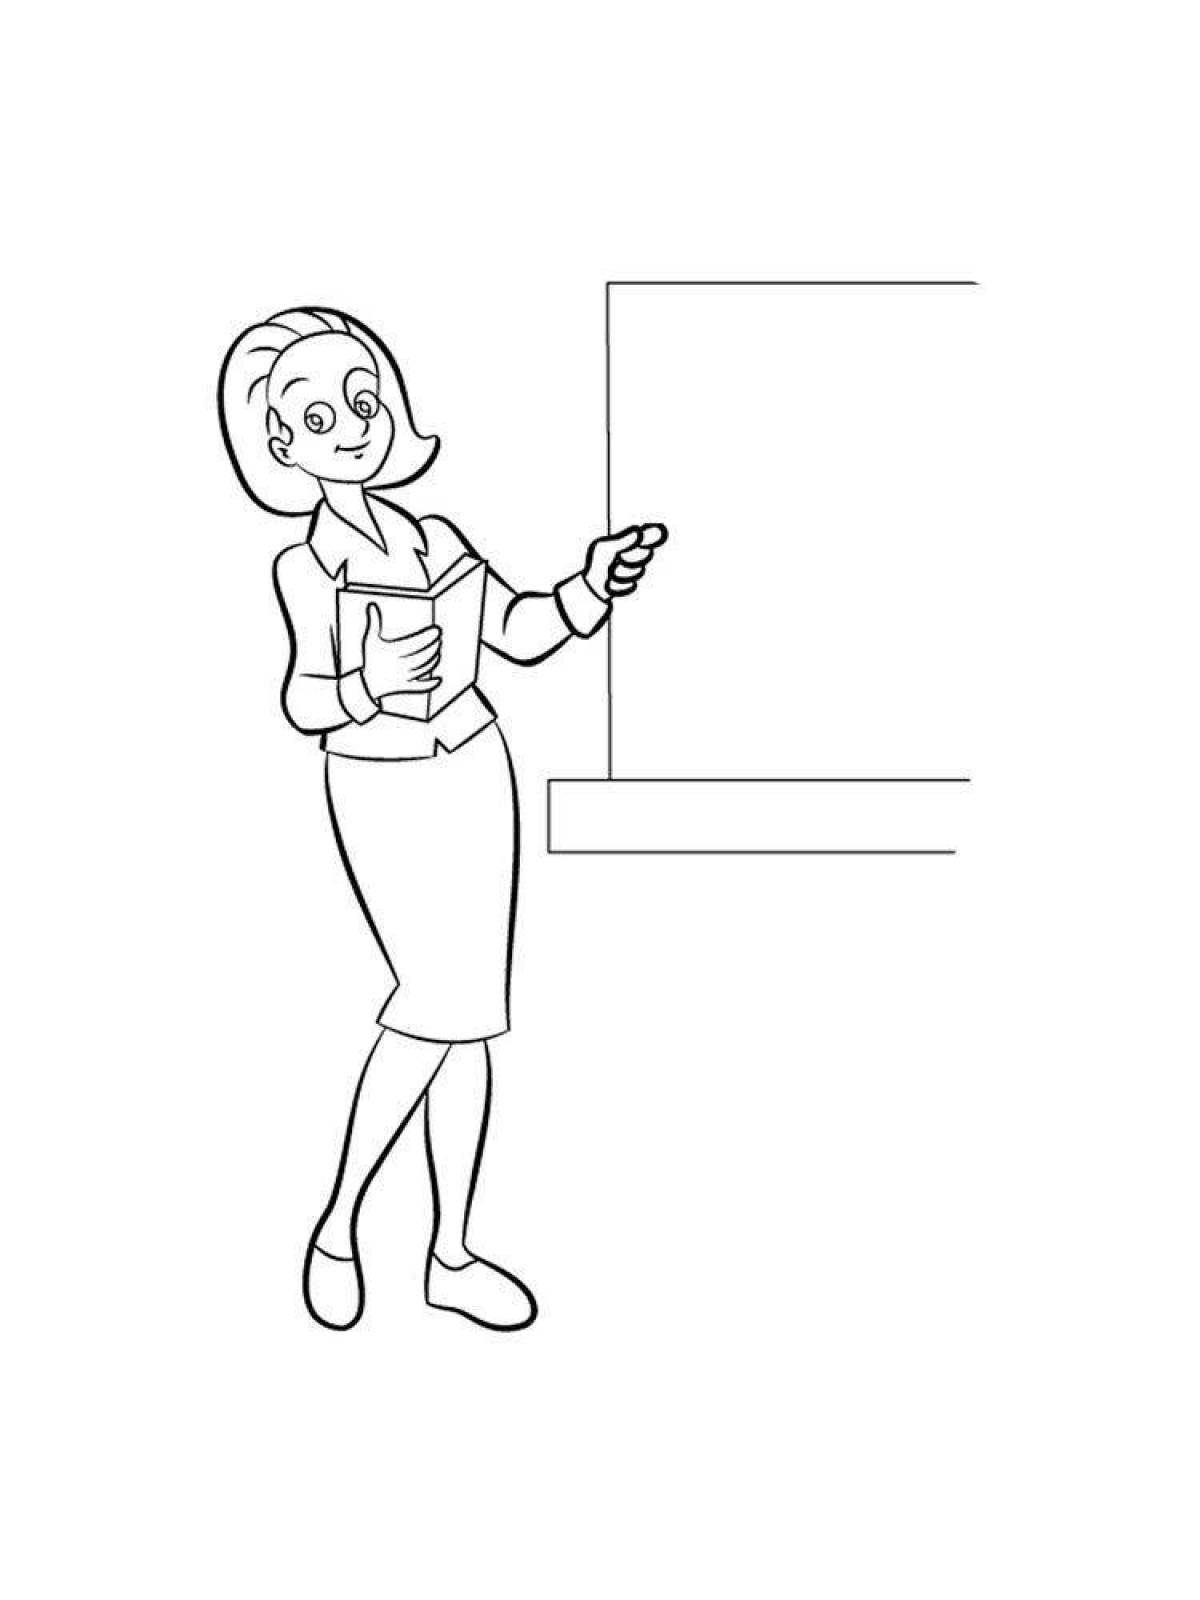 Attractive teacher coloring book for kids